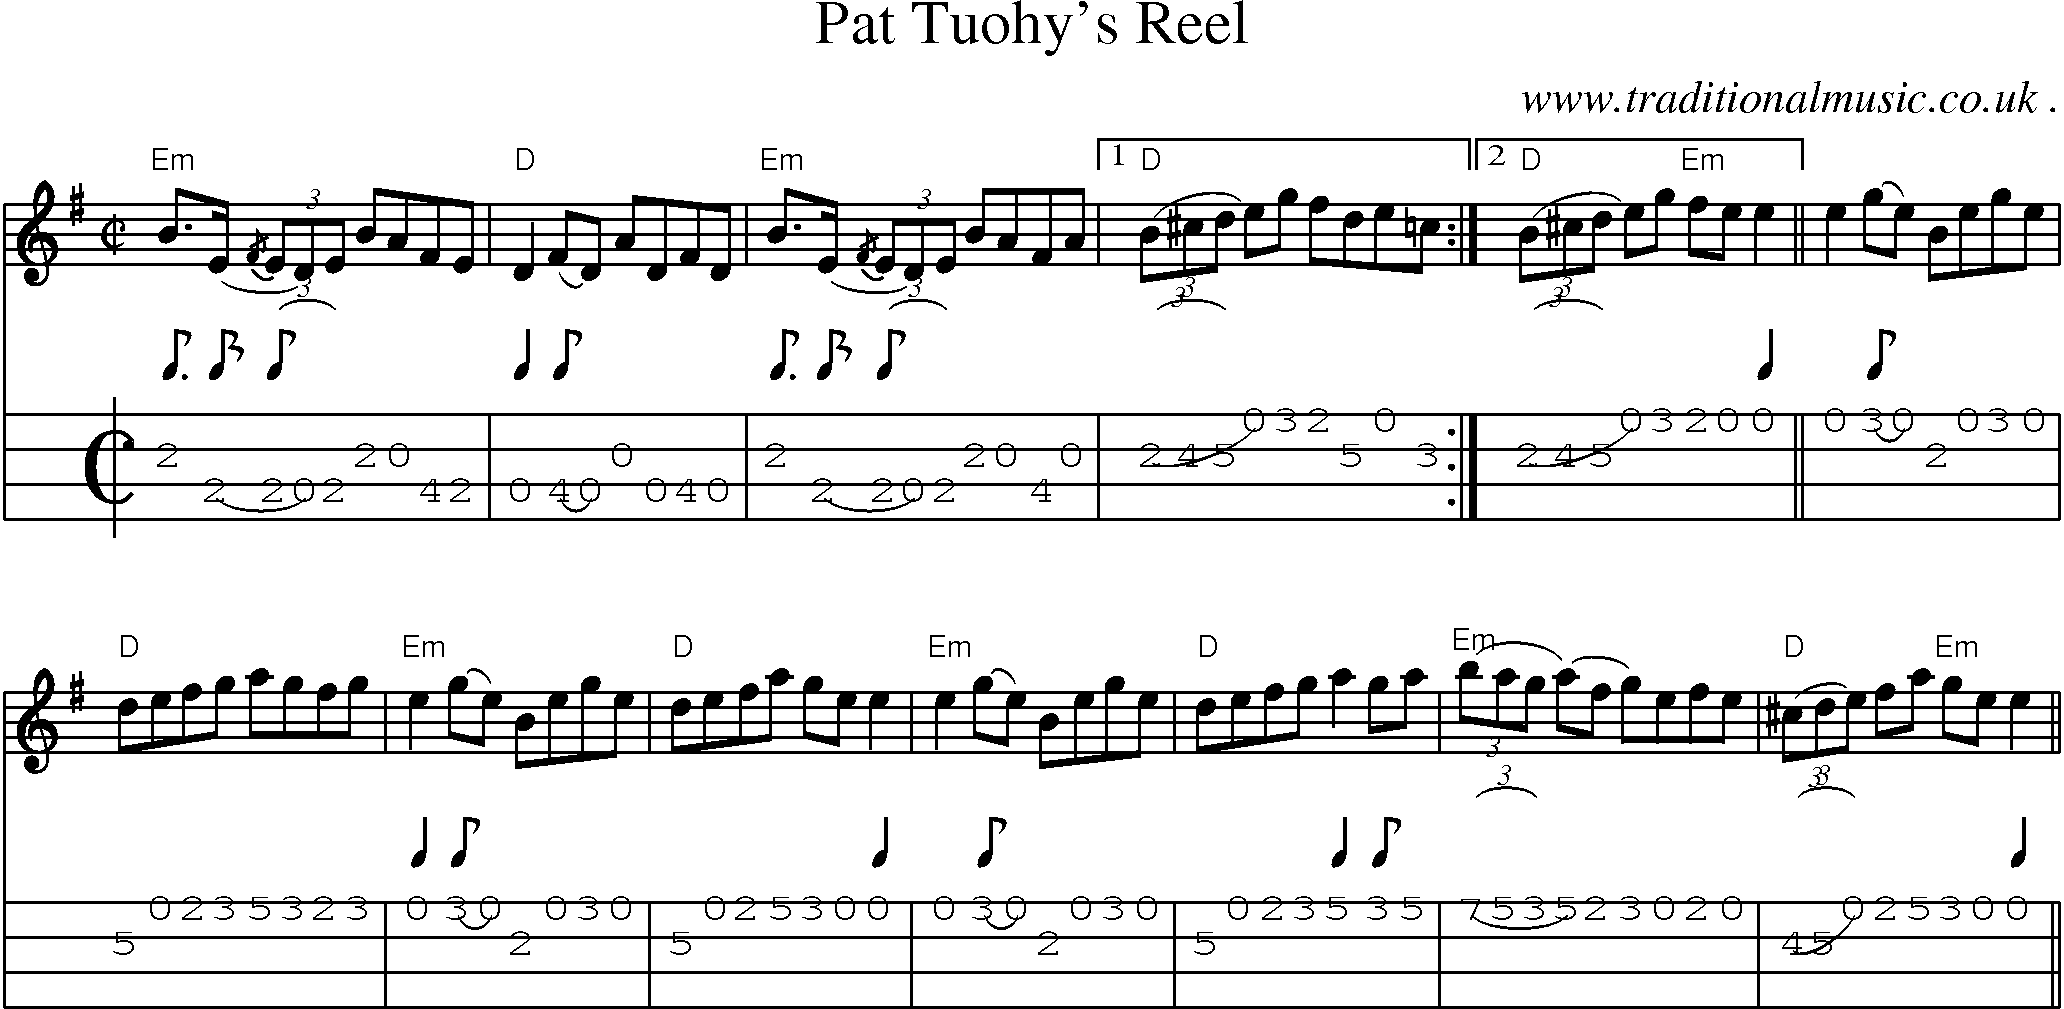 Music Score and Guitar Tabs for Pat Tuohys Reel